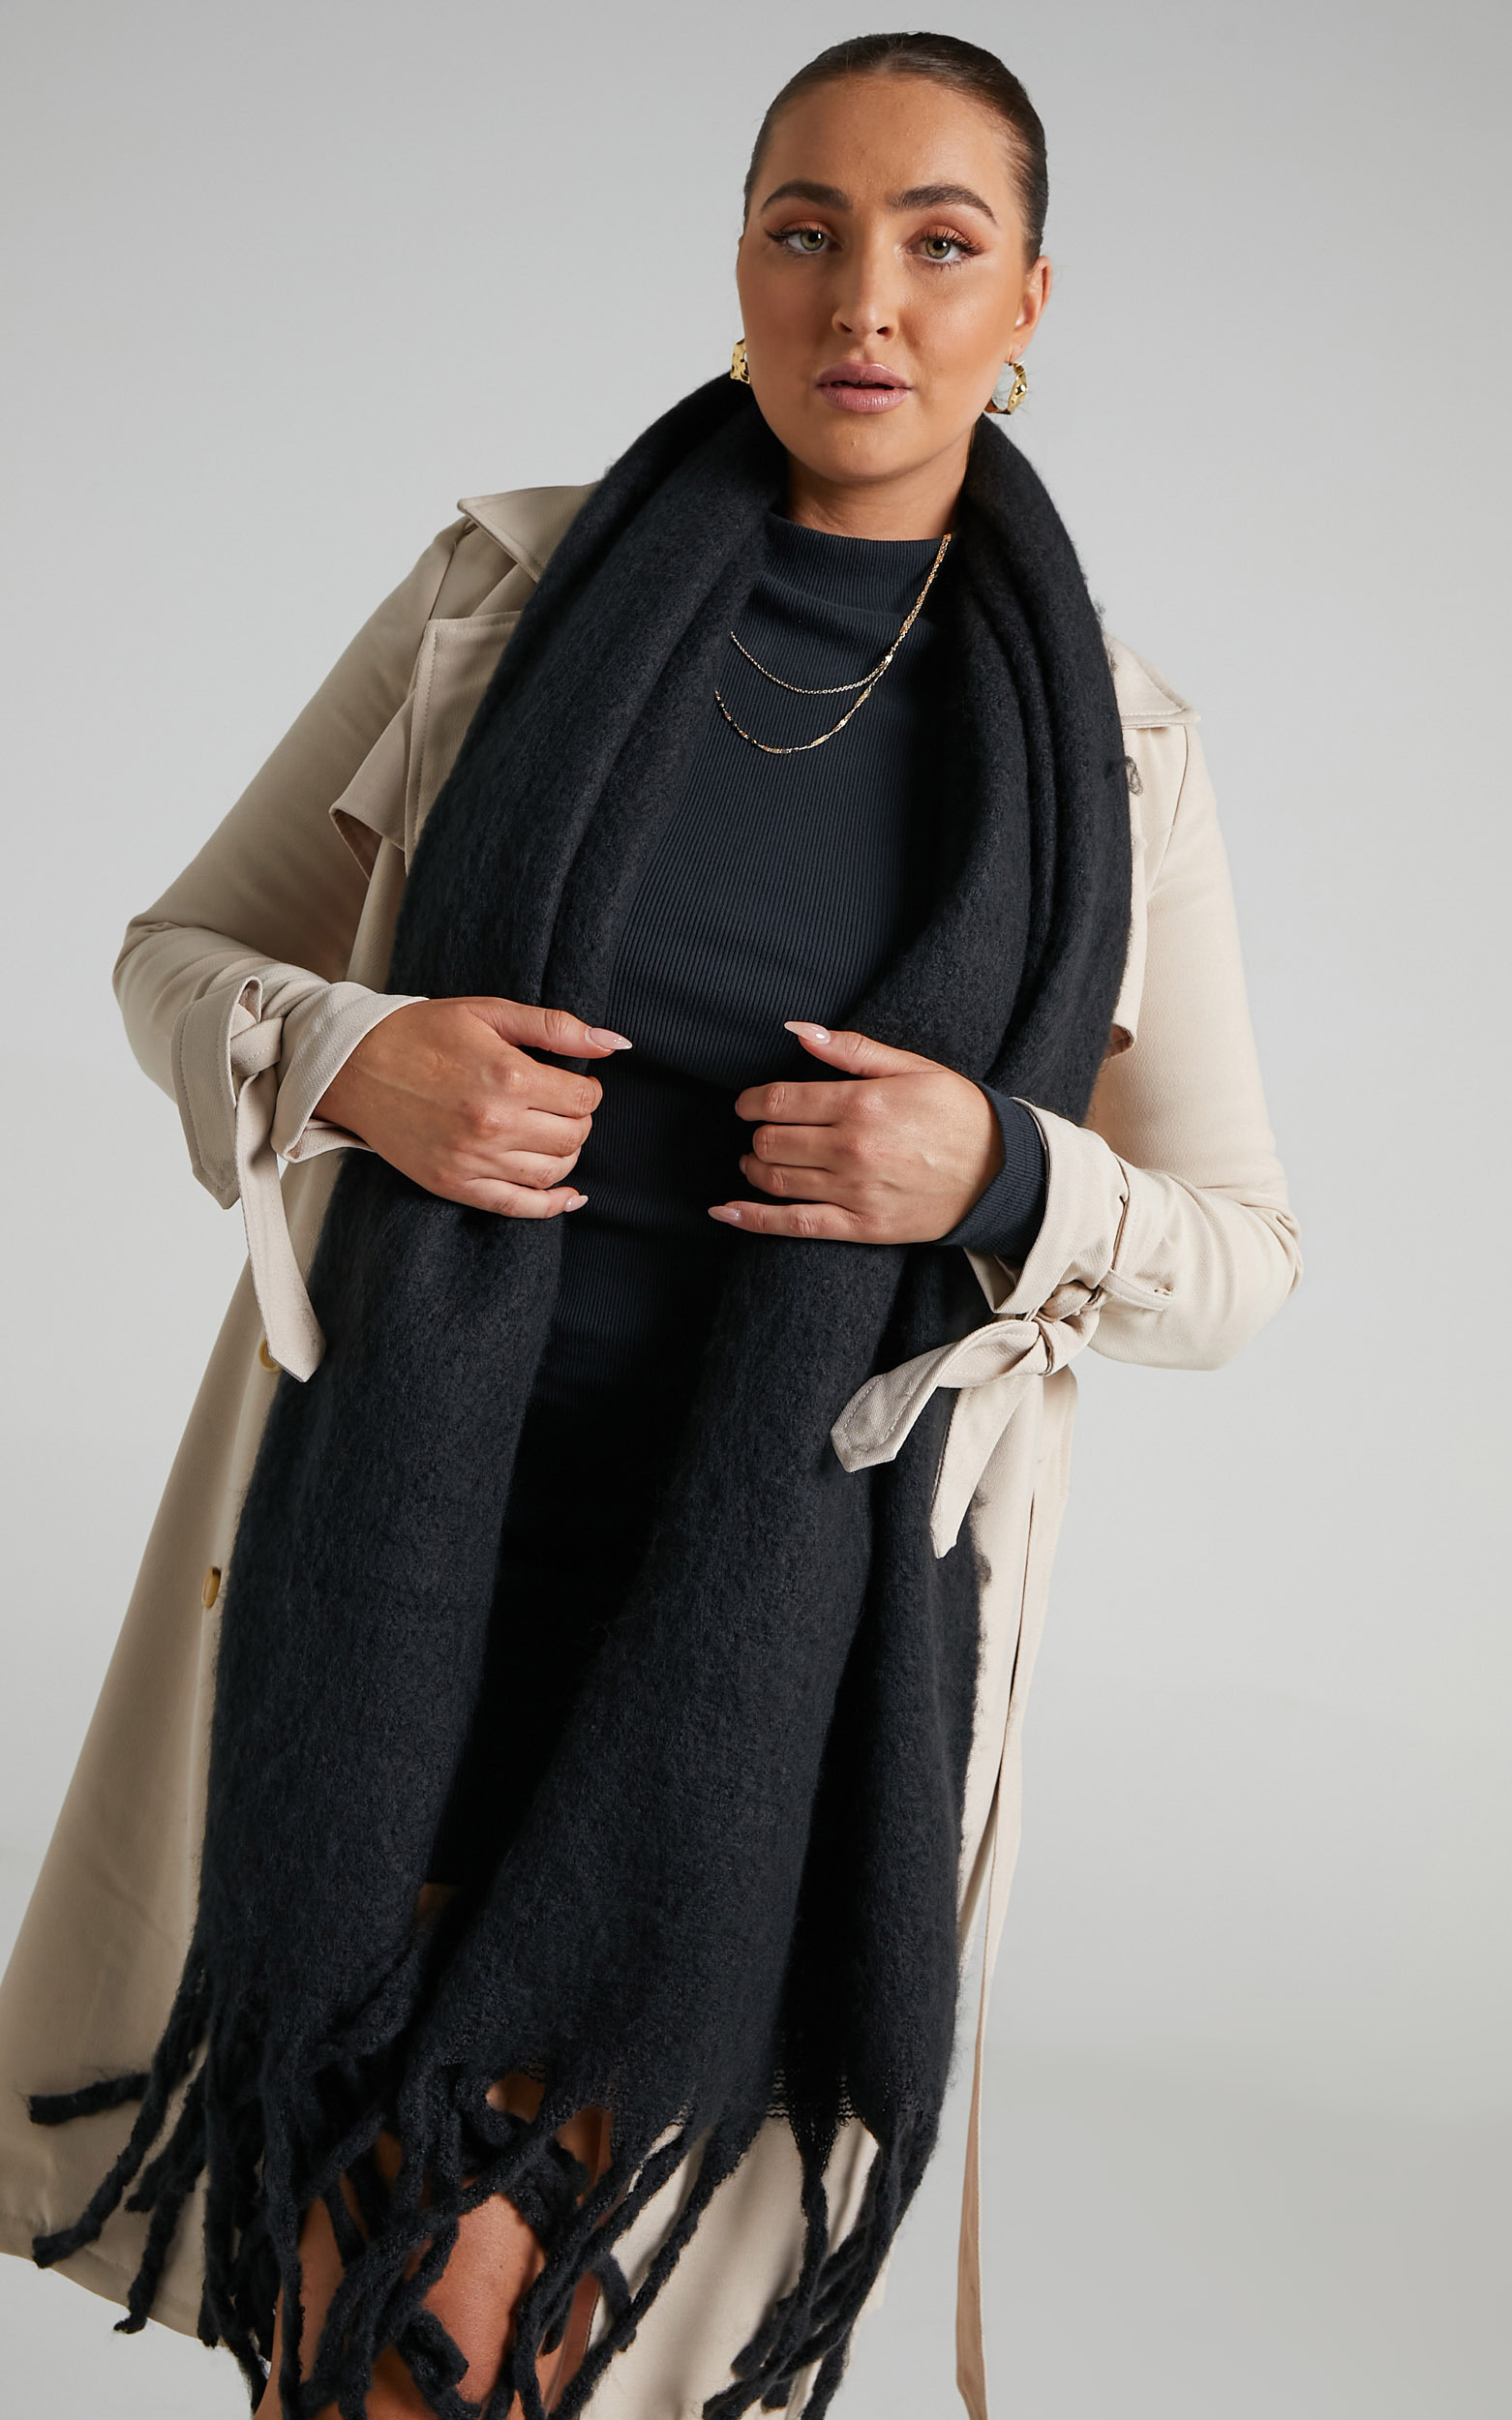 Lawrence Scarf in Black - OneSize, BLK1, hi-res image number null